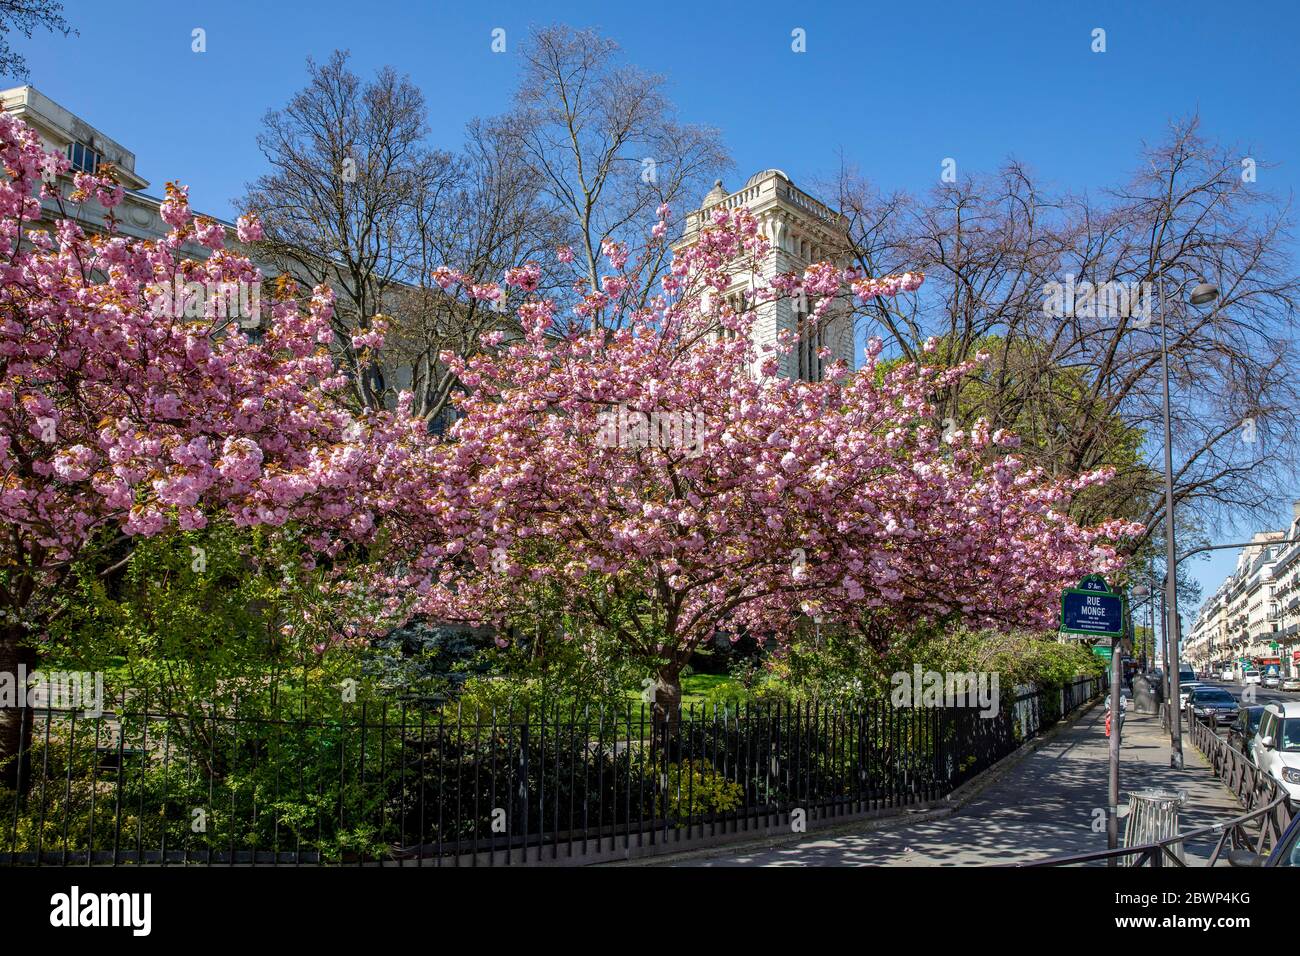 Paris, France - April 1, 2020: Spring in Paris. 'College de France' tower (Latin quarter) and blossoming pink trees Stock Photo